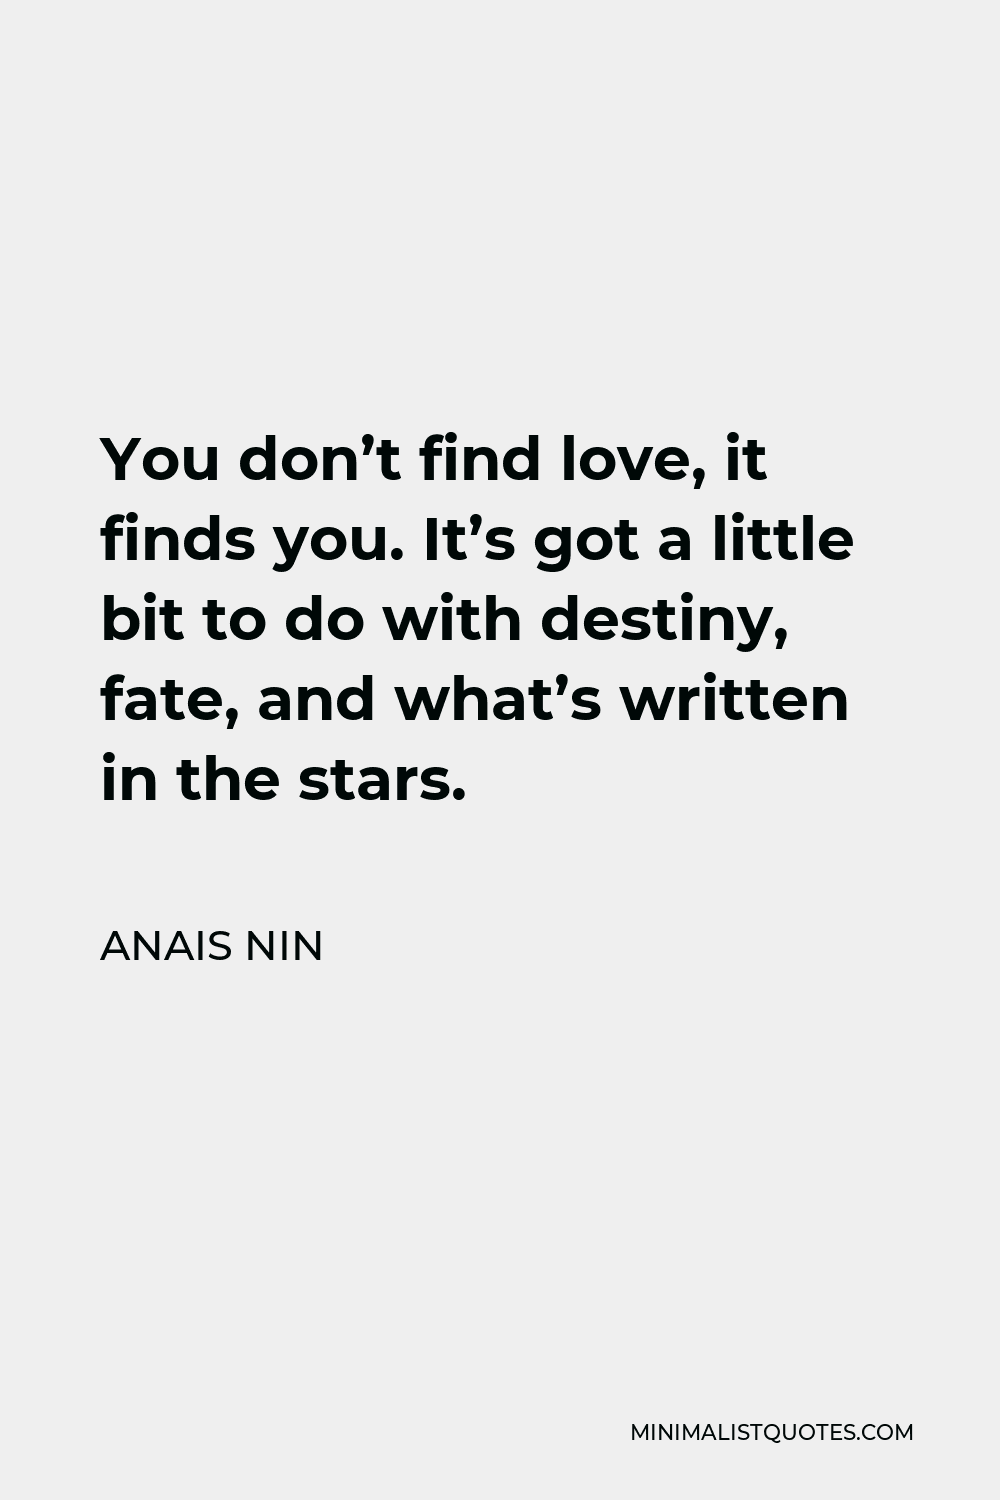 Anais Nin Quote - You don’t find love, it finds you. It’s got a little bit to do with destiny, fate, and what’s written in the stars.